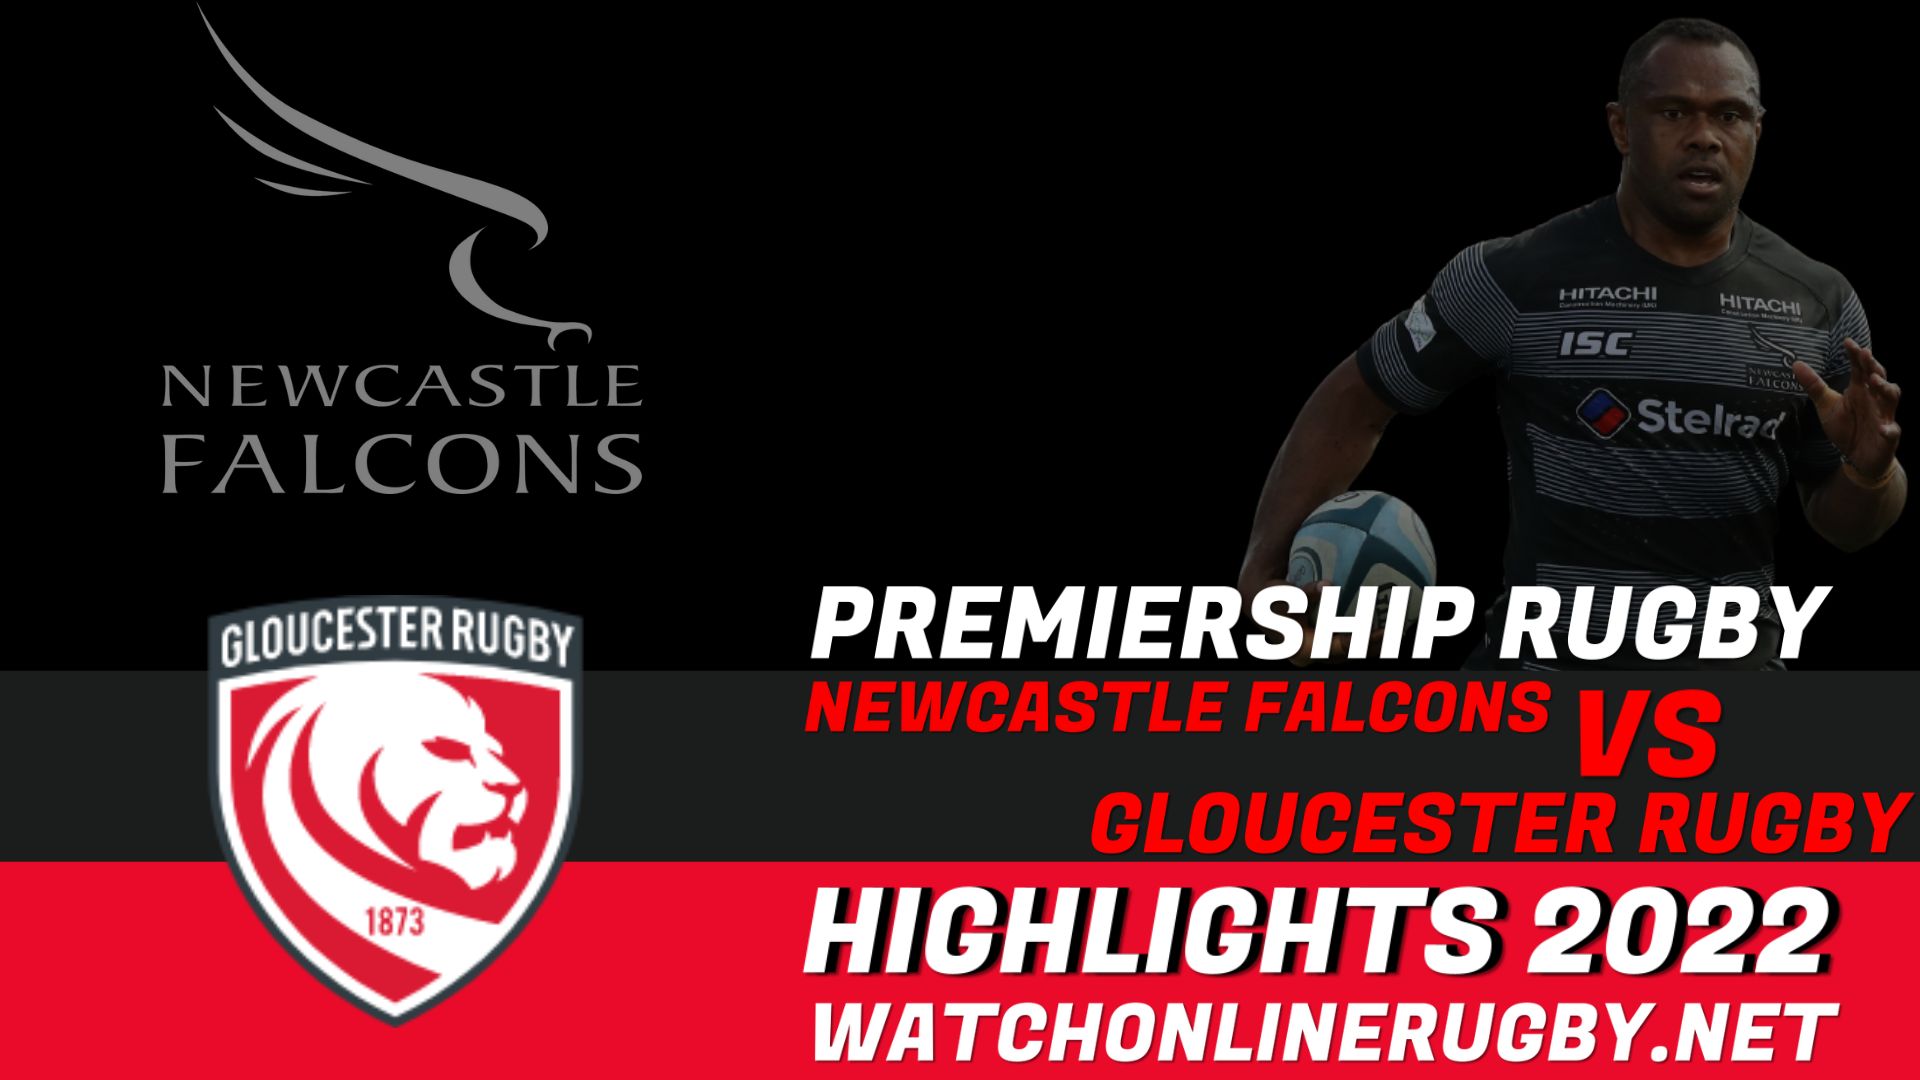 Newcastle Falcons Vs Gloucester Rugby Premiership Rugby 2022 RD 14